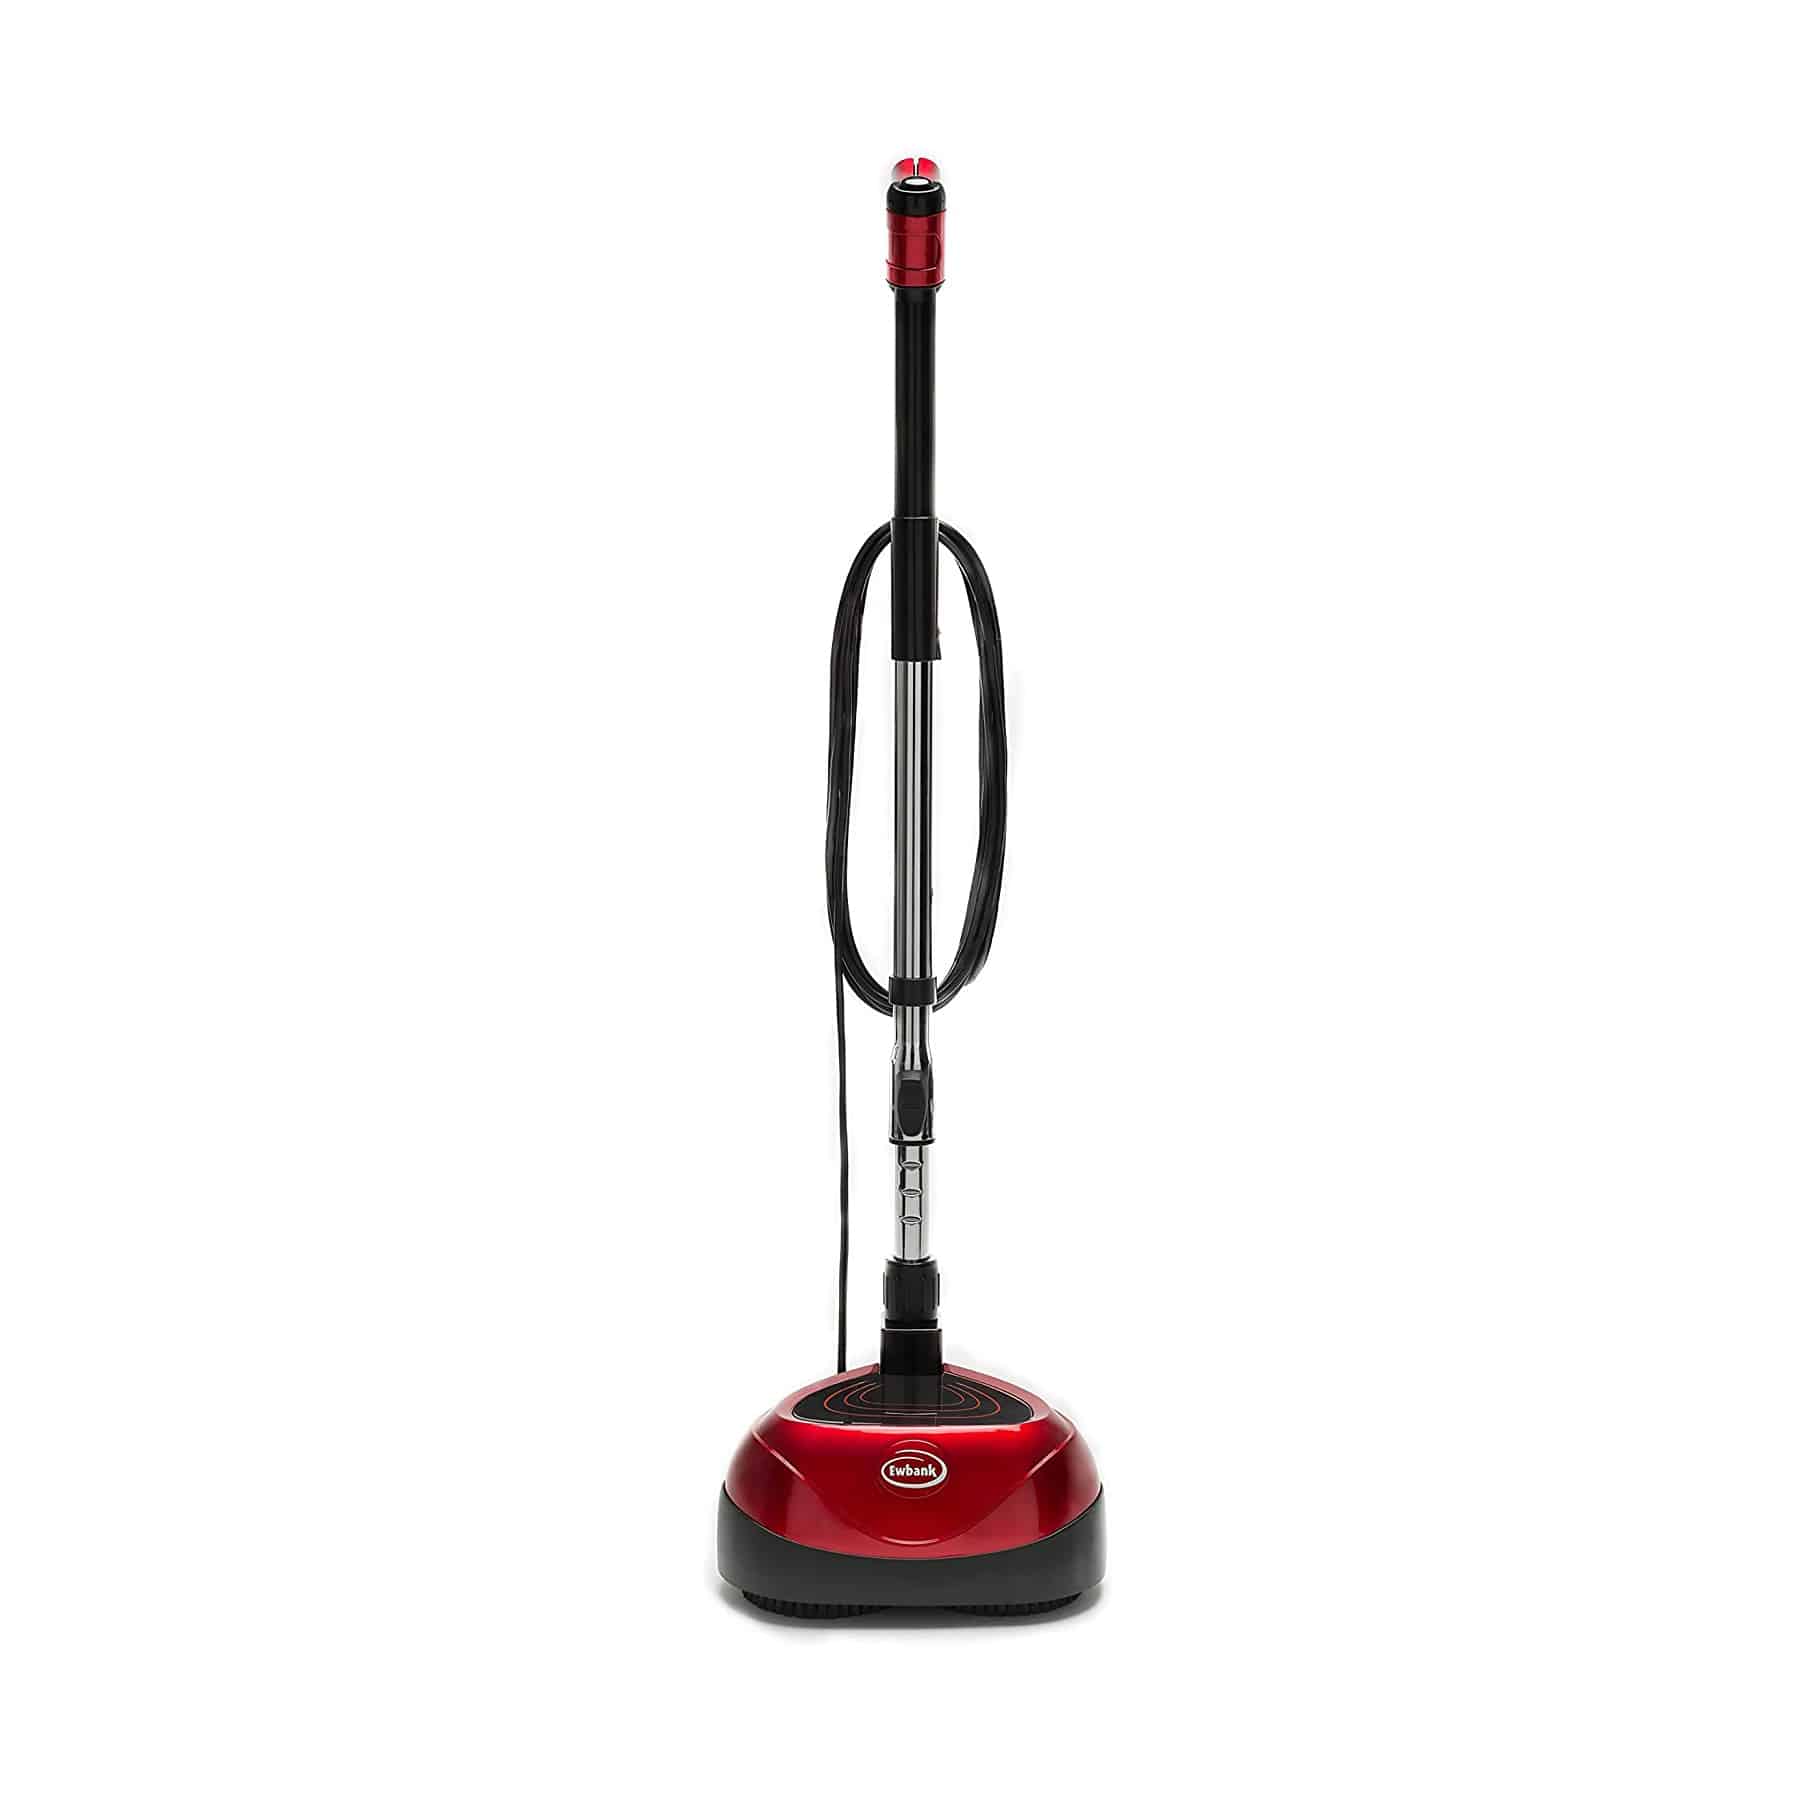 Top 10 Best Electric Spin Scrubbers in 2021 Reviews